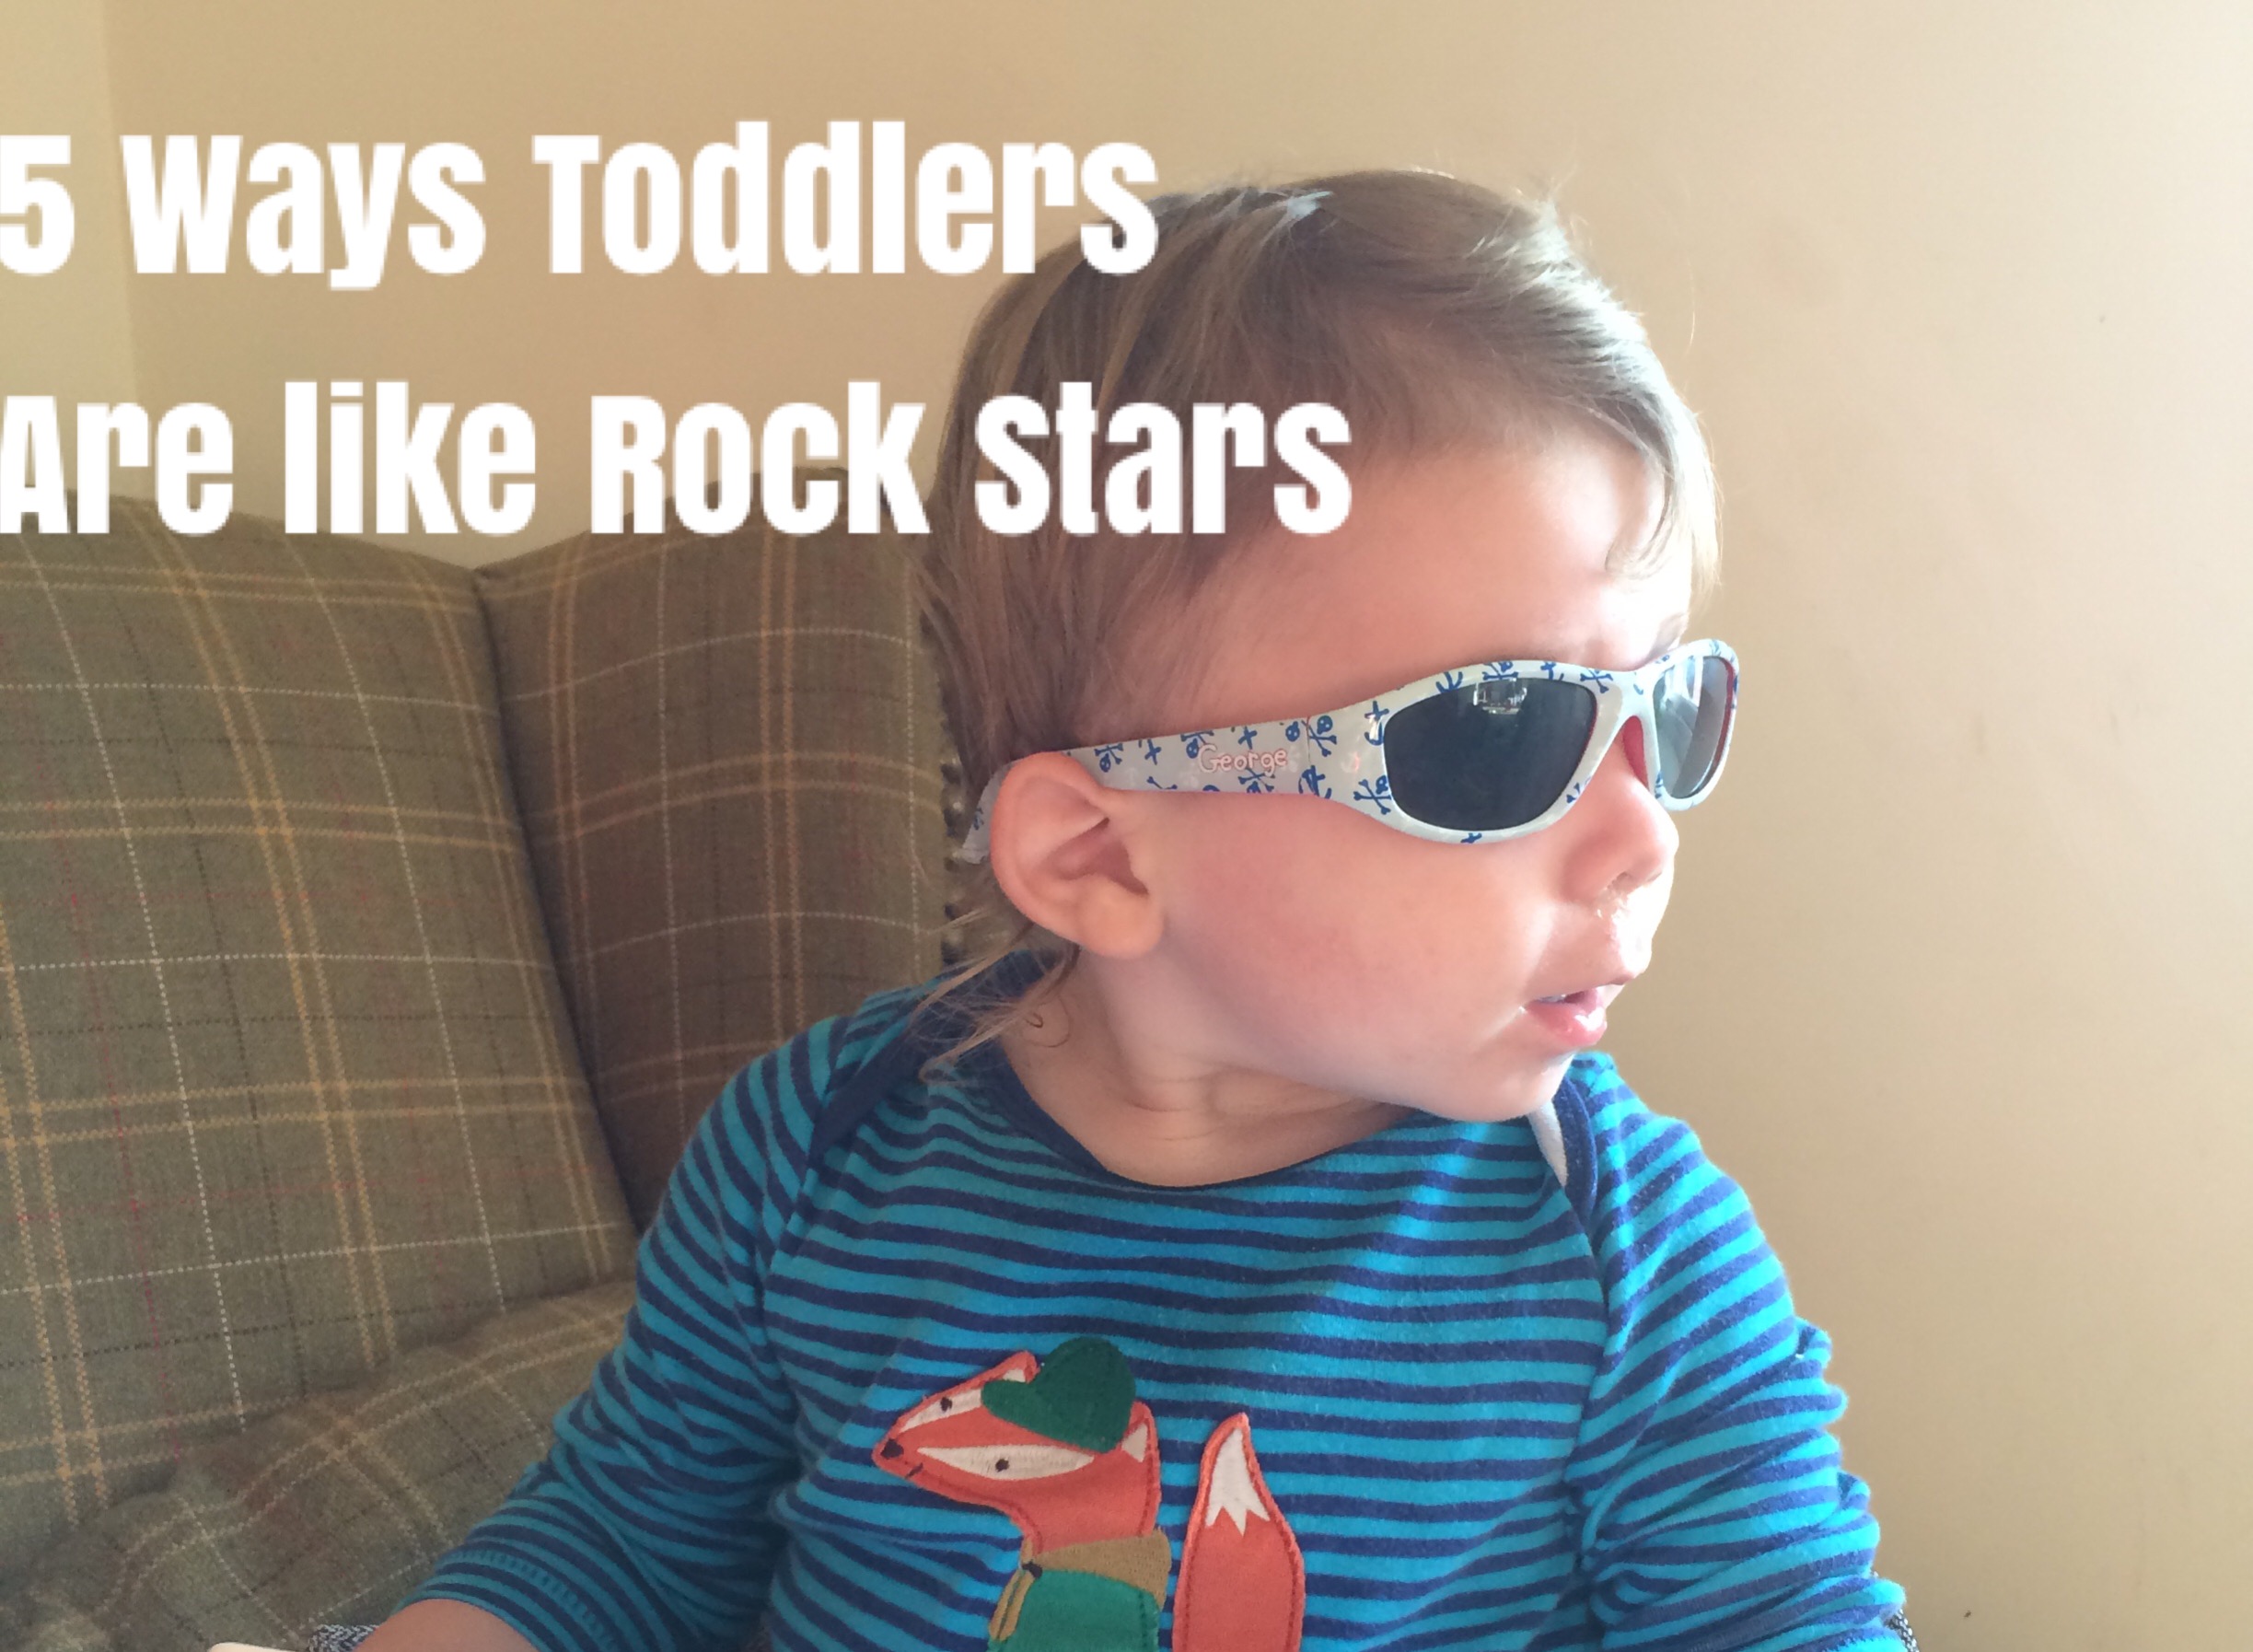 5 Ways Toddlers are like Rock Stars